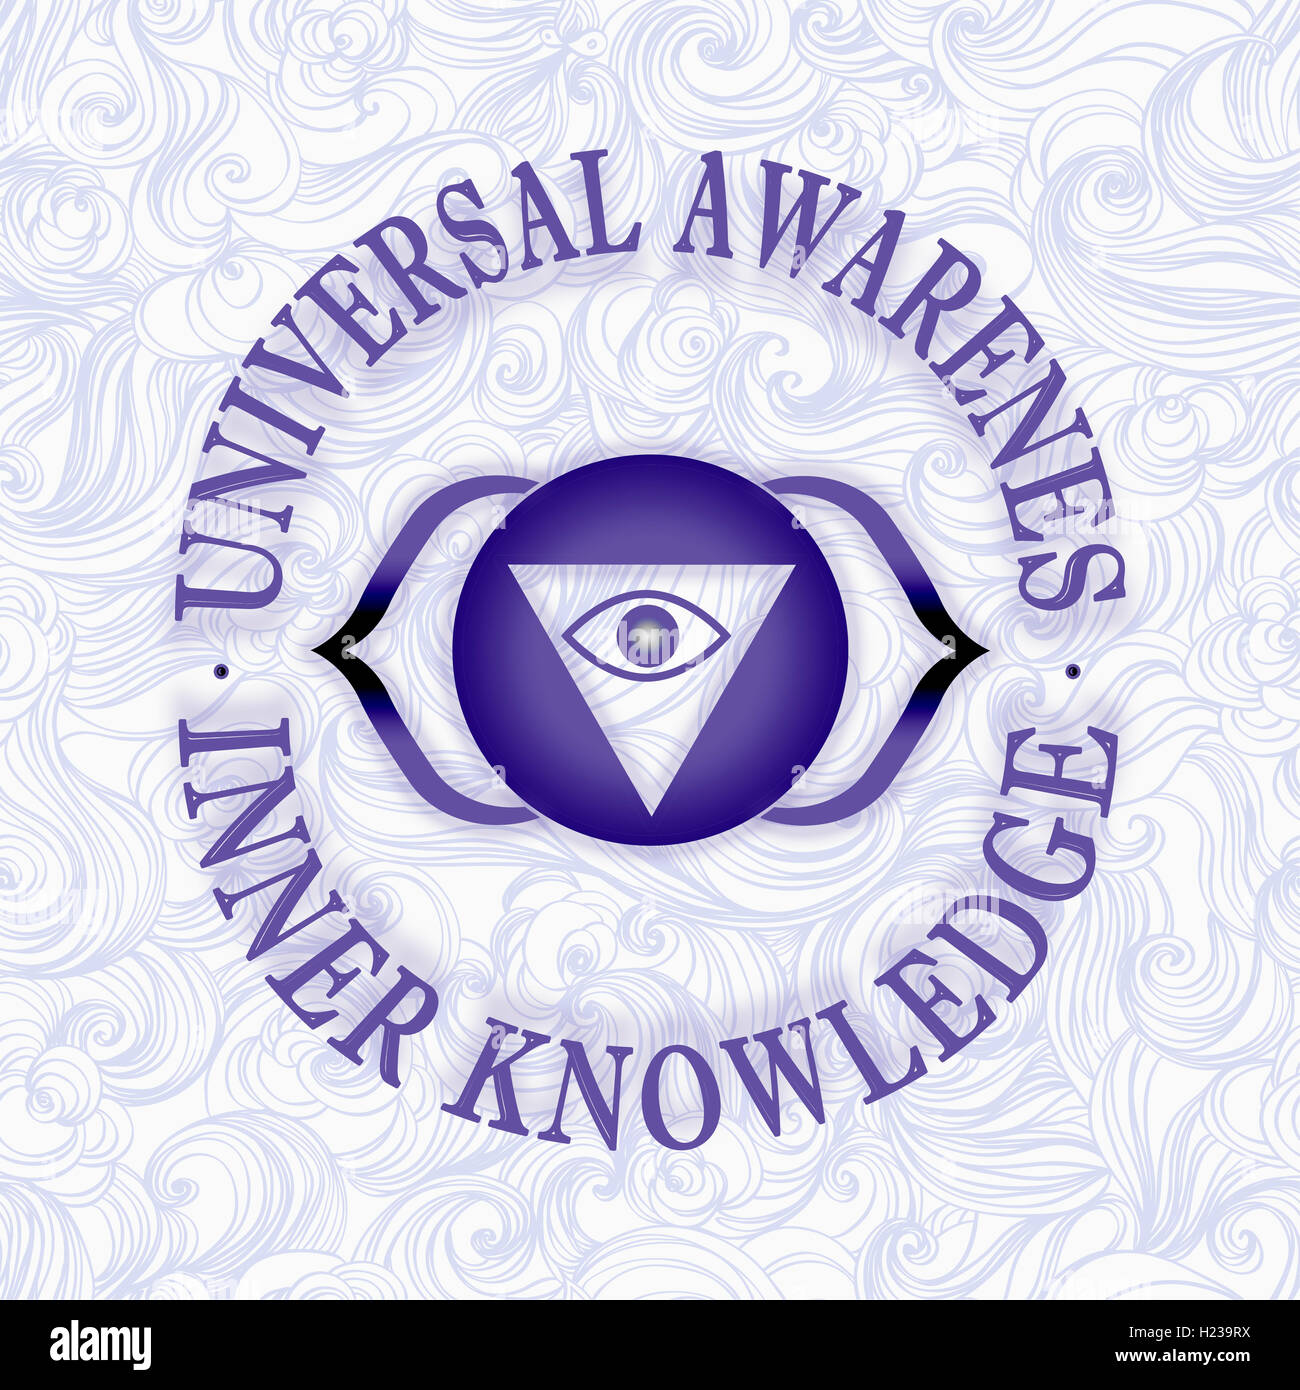 Symbol of the Third Eye (Ajna) chakra. Ajna represents Awareness, Intuition, Understanding, Insight, Realisation. Stock Photo